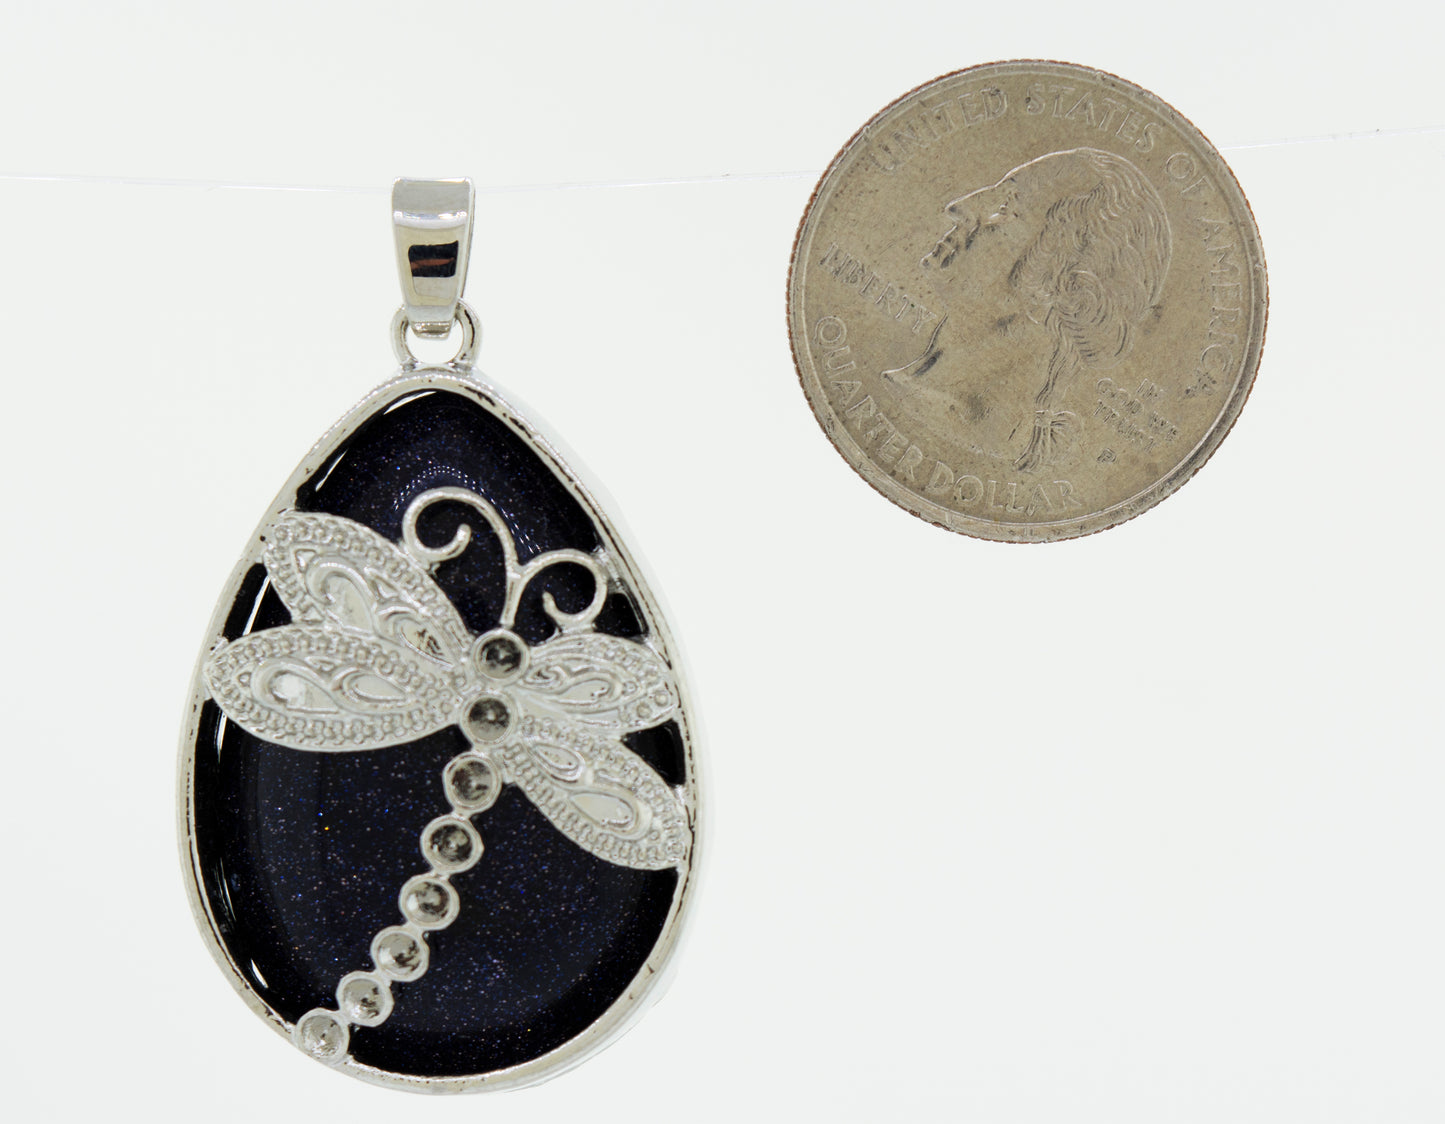 A Super Silver teardrop stone pendant with a dragonfly shape.